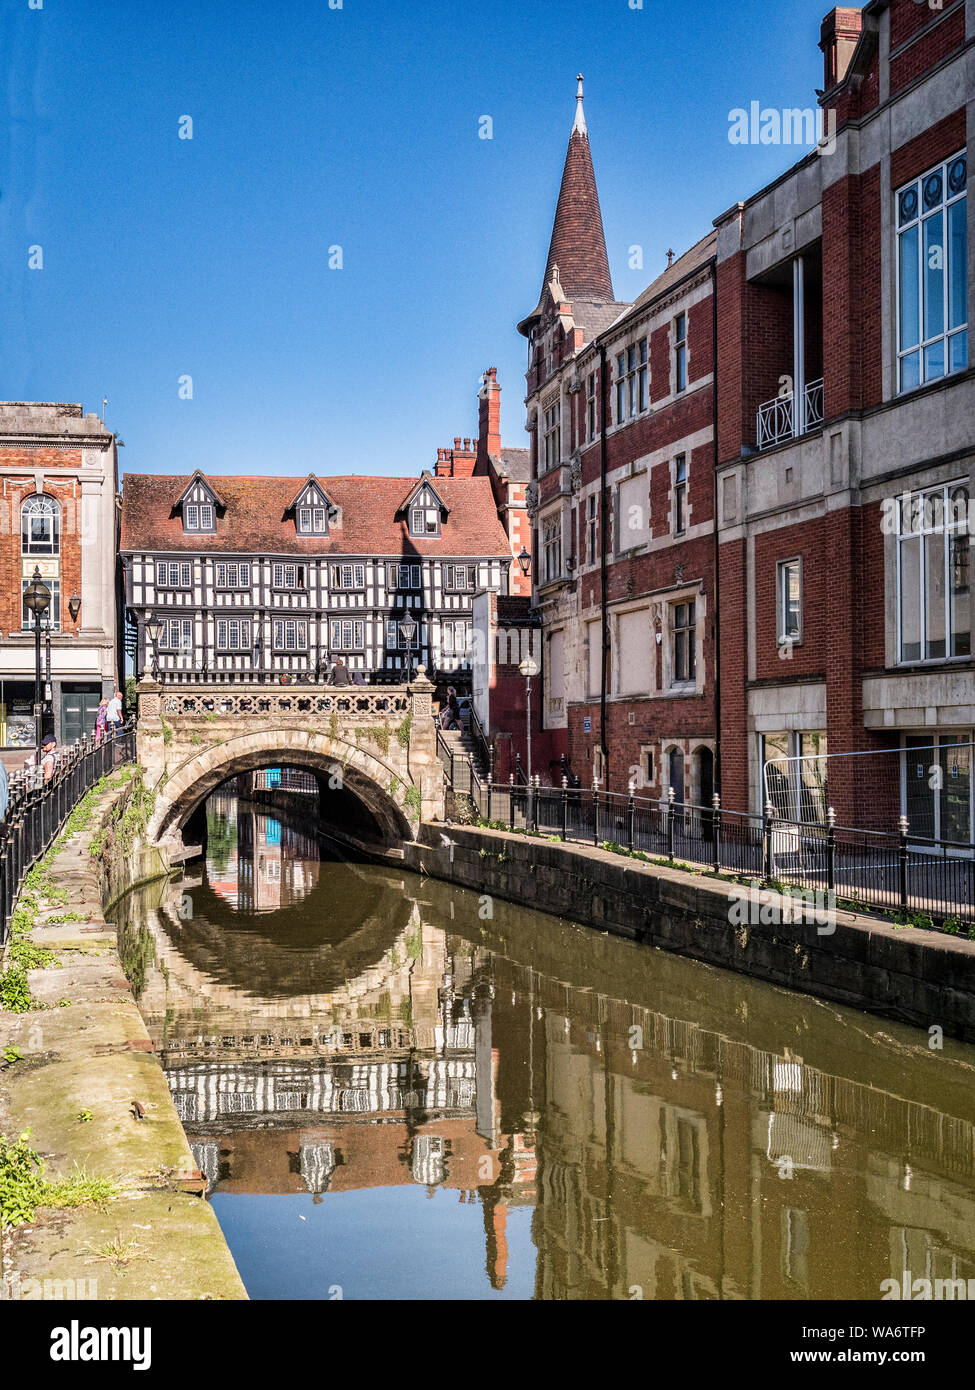 2 July 2019: Lincoln, UK - The River Witham in central Lincoln, looking towards High Bridge. Stock Photo